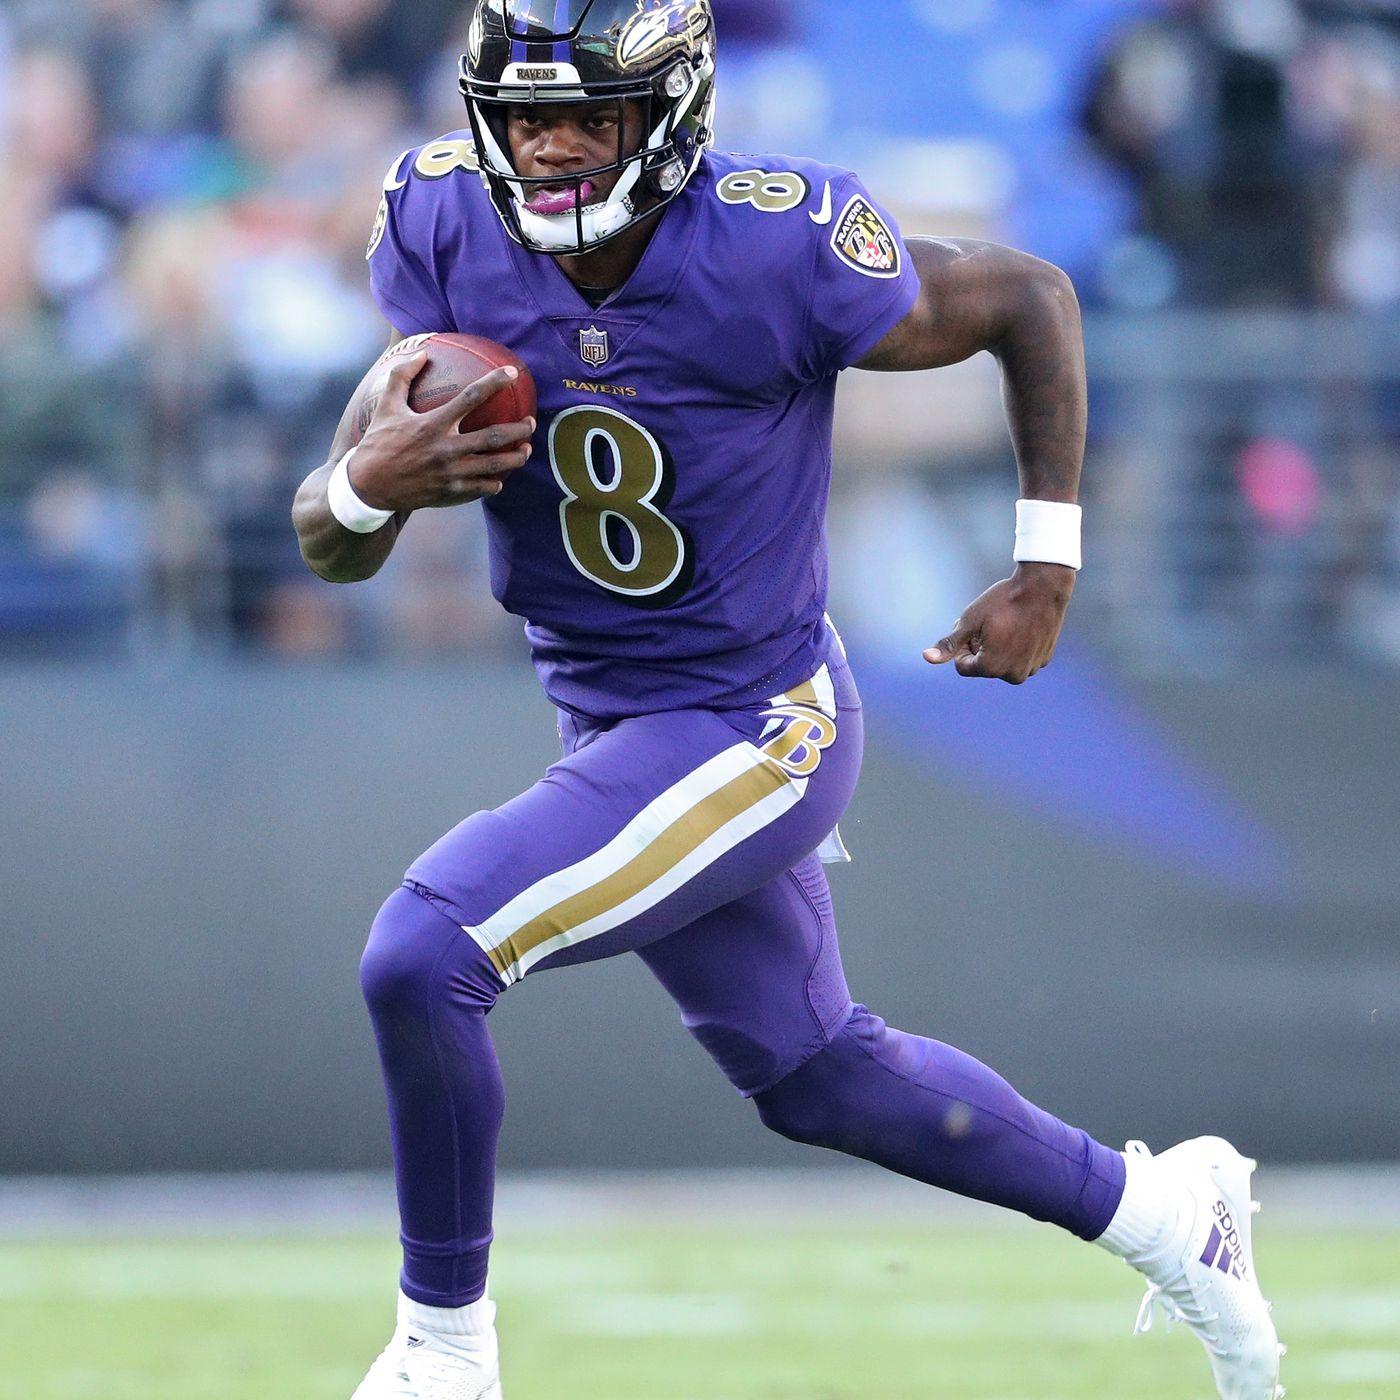 Lamar Jackson will start for the Ravens, and the Falcons